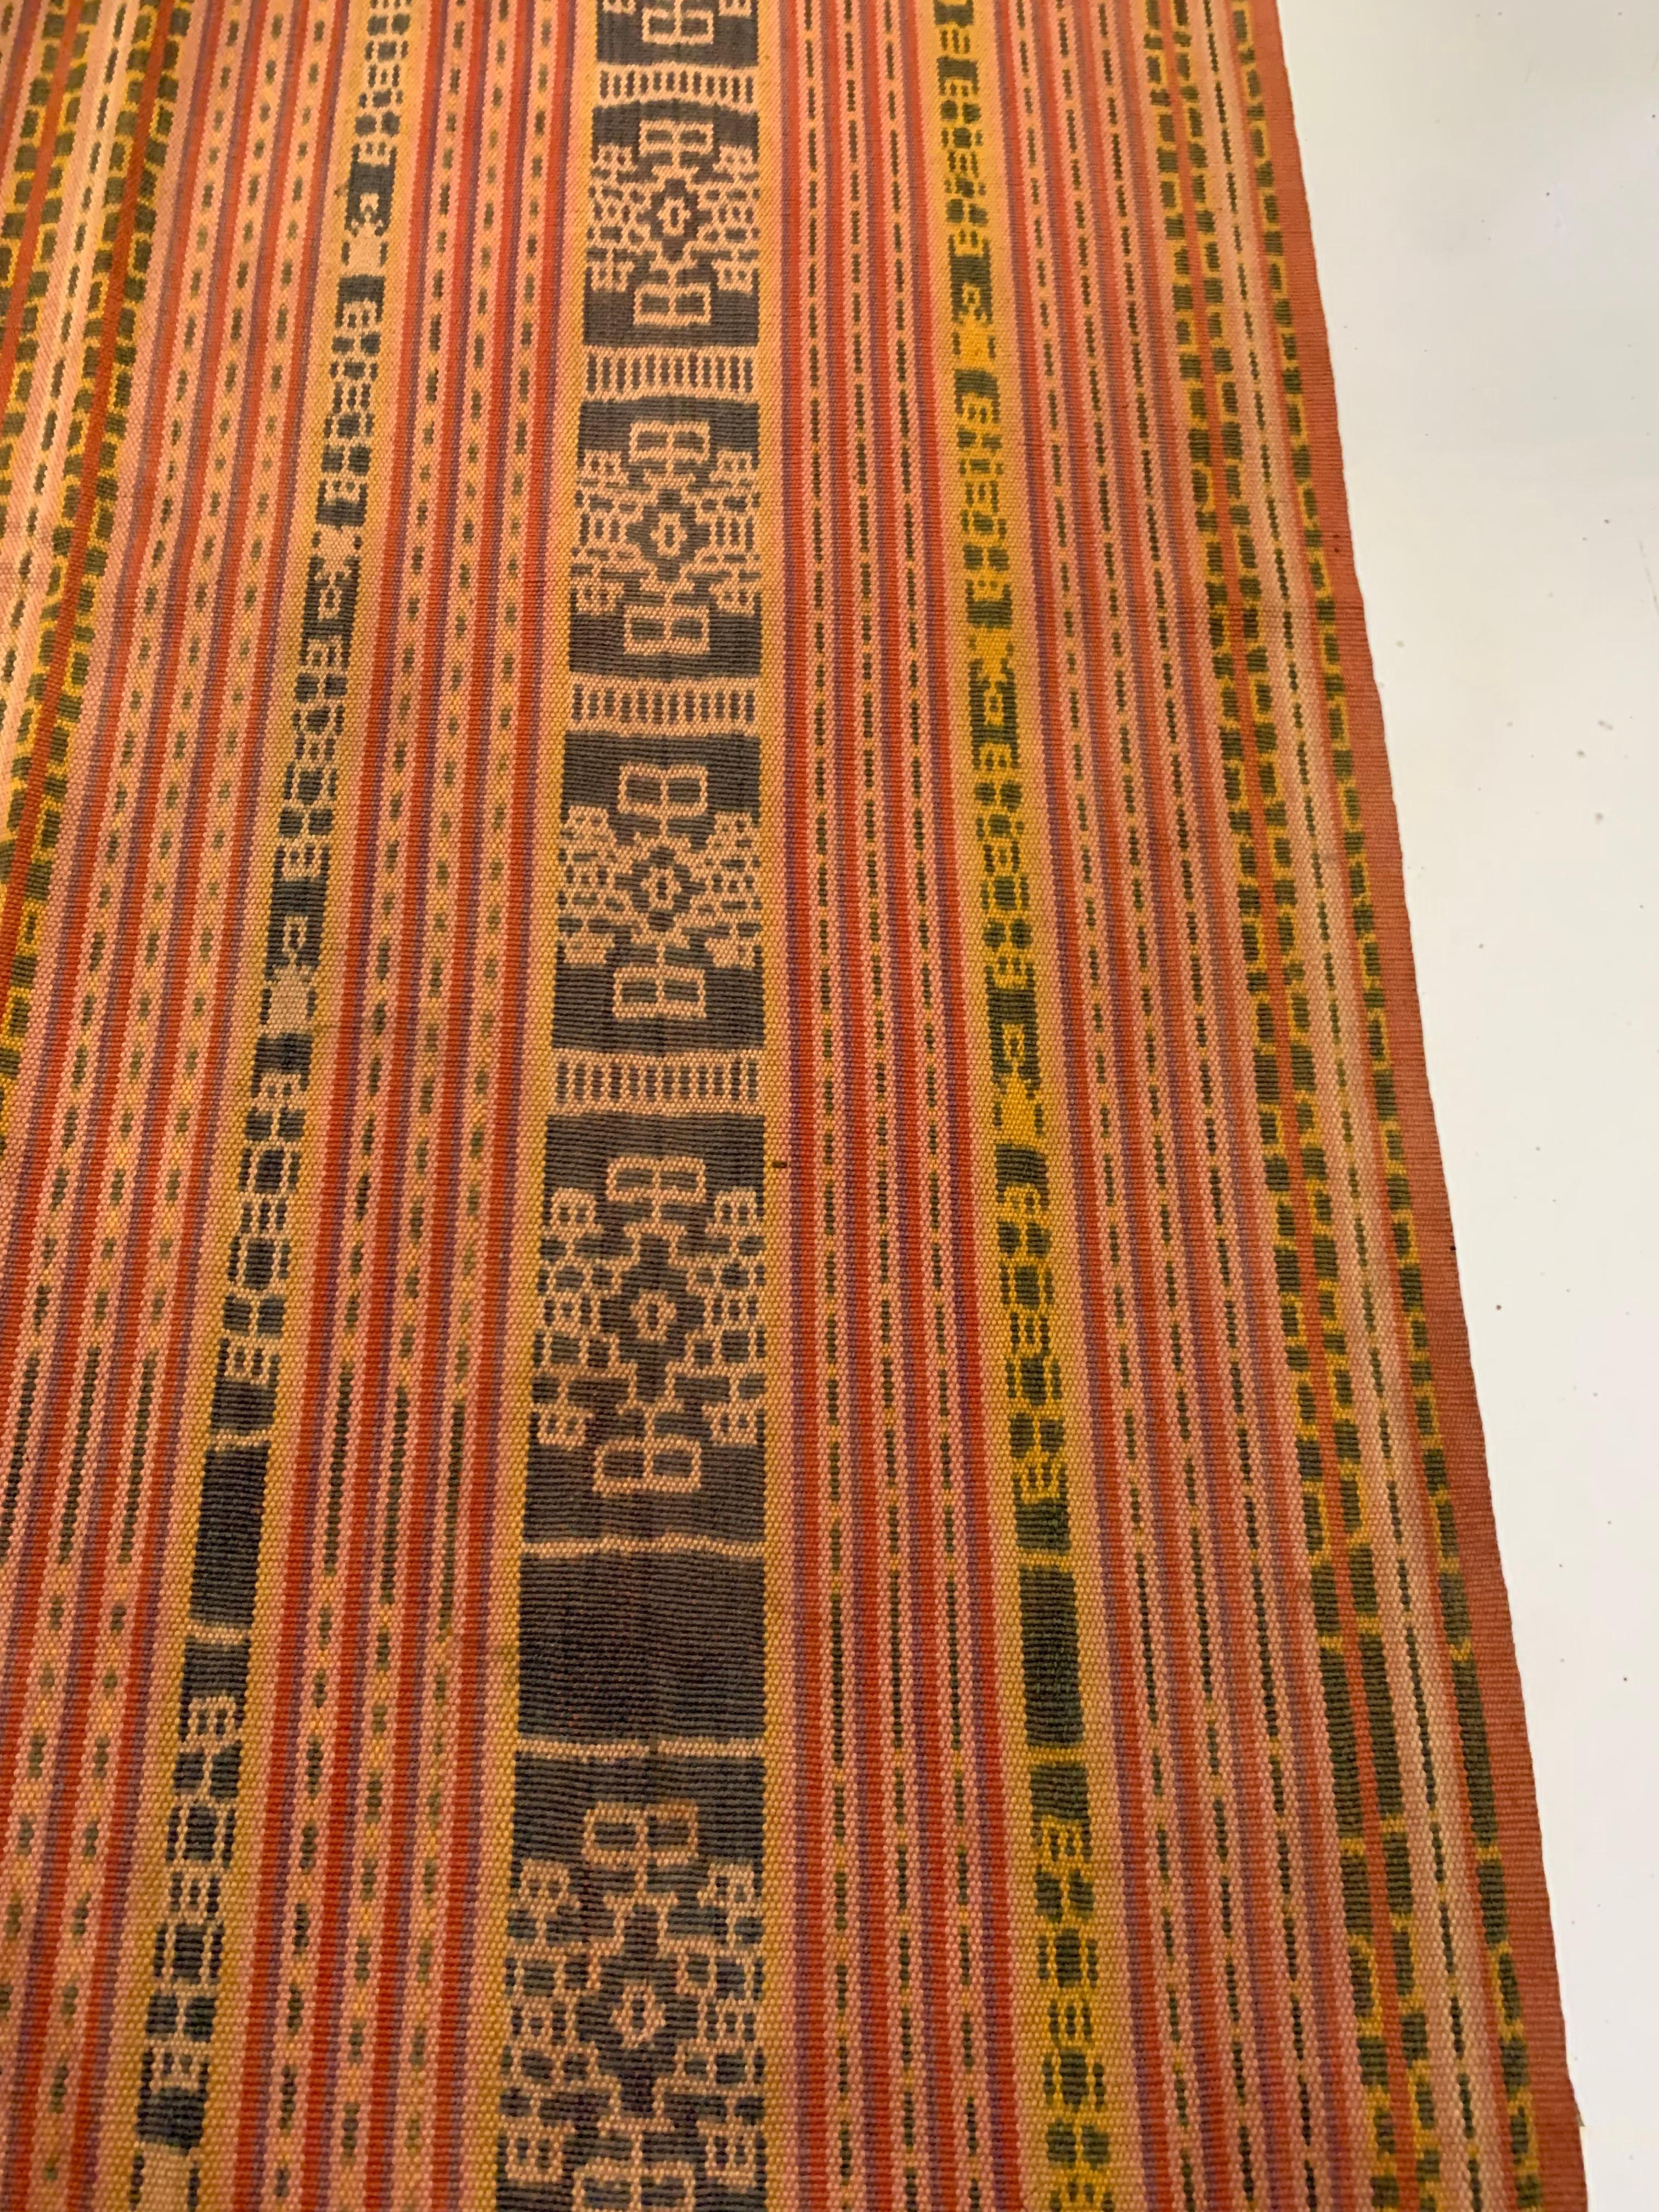 Rare Ikat Textile from Timor Stunning Tribal Motifs & Colors, Indonesia c. 1900 For Sale 1